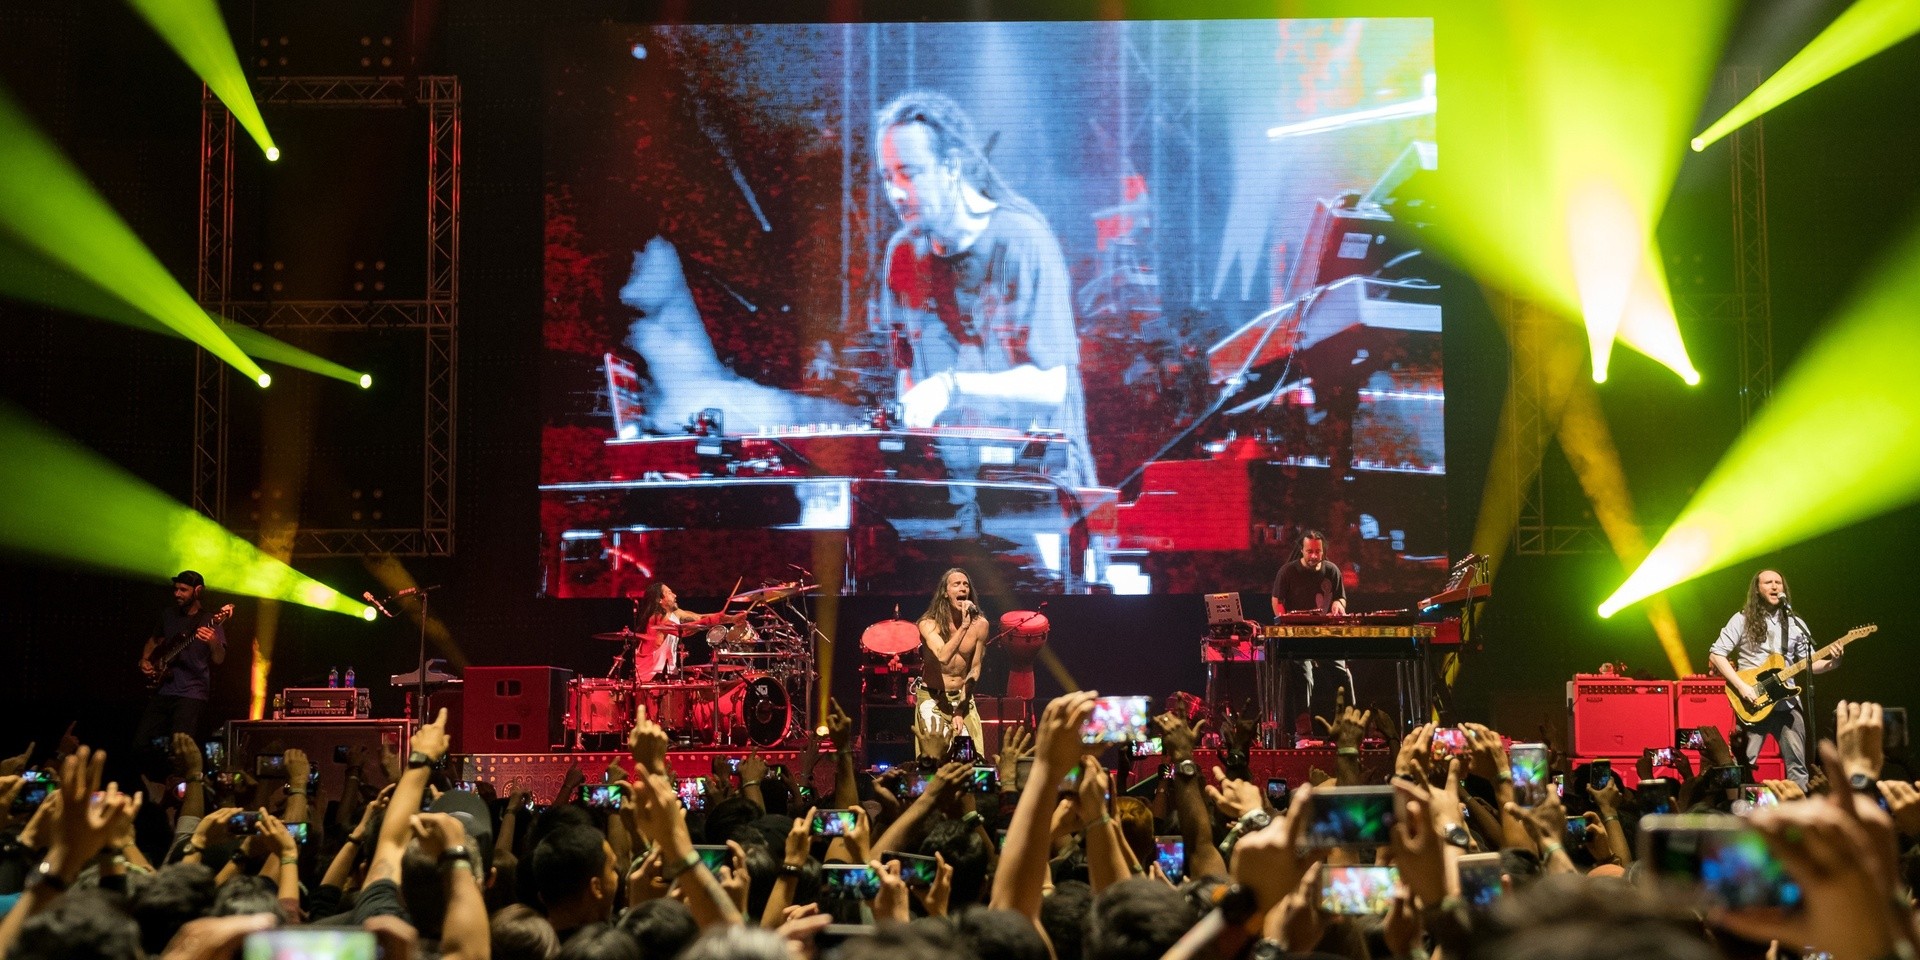 Mixing classics and new hits, Incubus prove they've still got it – gig report